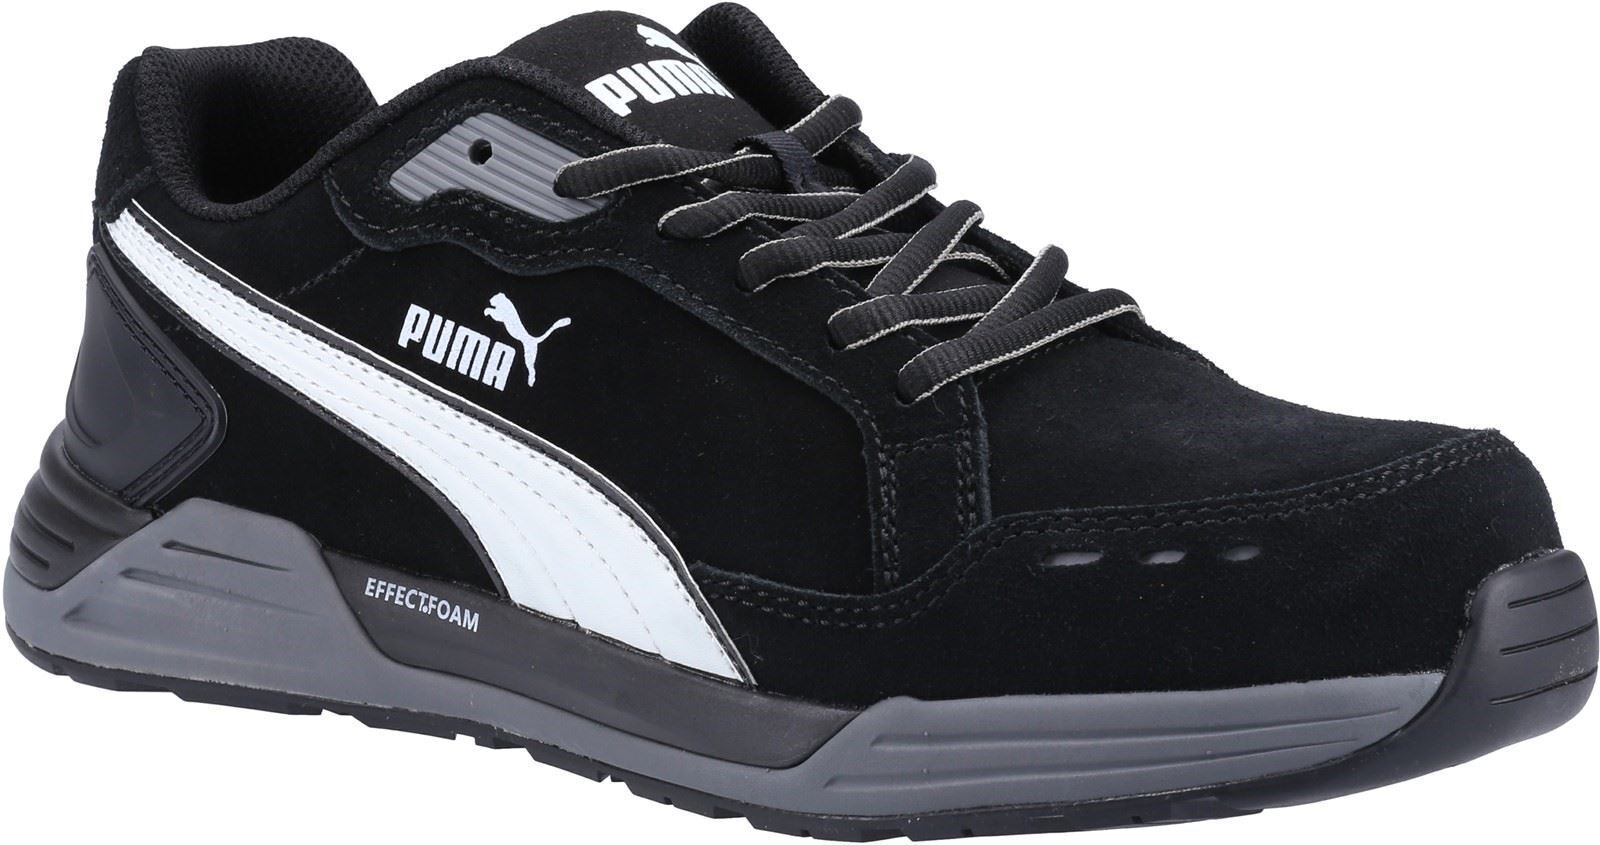 Puma Safety Trainers Safety Airtwist Low S3 Safety Trainer Black ESD HRO  SRC | eBay